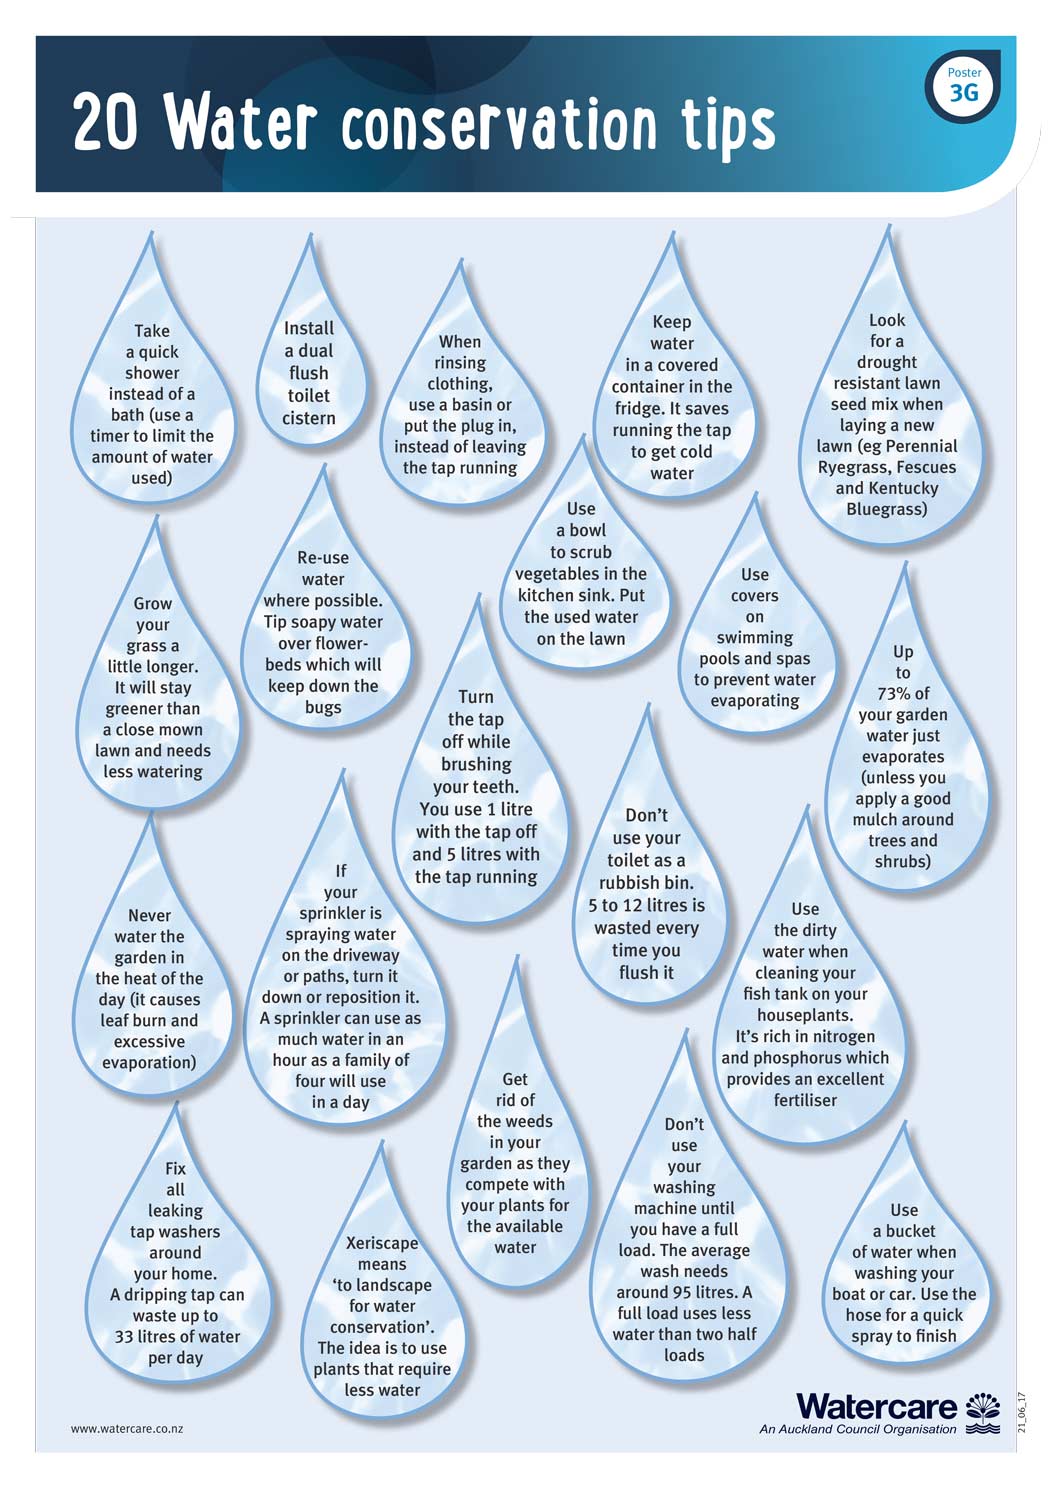 water_conservation_tips_21_06_17.pdf